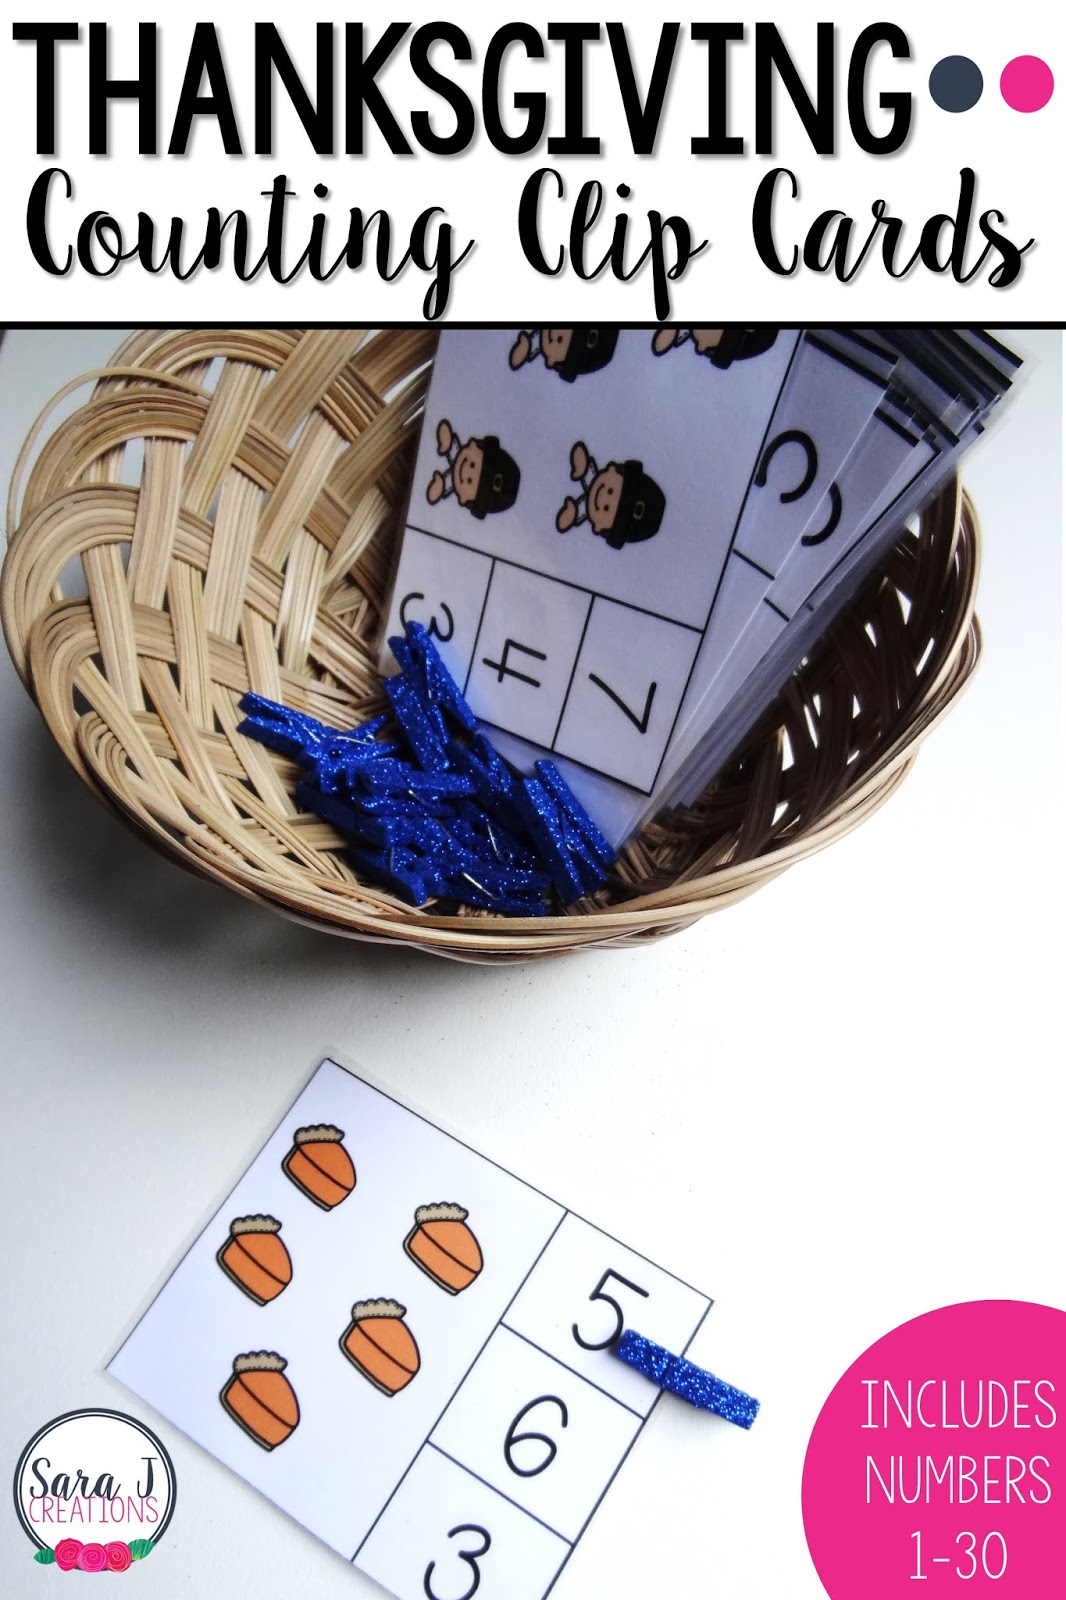 Practice counting and fine motor skills with these adorable Thanksgiving themed counting clip cards. Just add a clothespin and your little ones are ready to practice counting numbers 1-30. Perfect for preschool or kindergarten. Free sample included if you want to try them out.